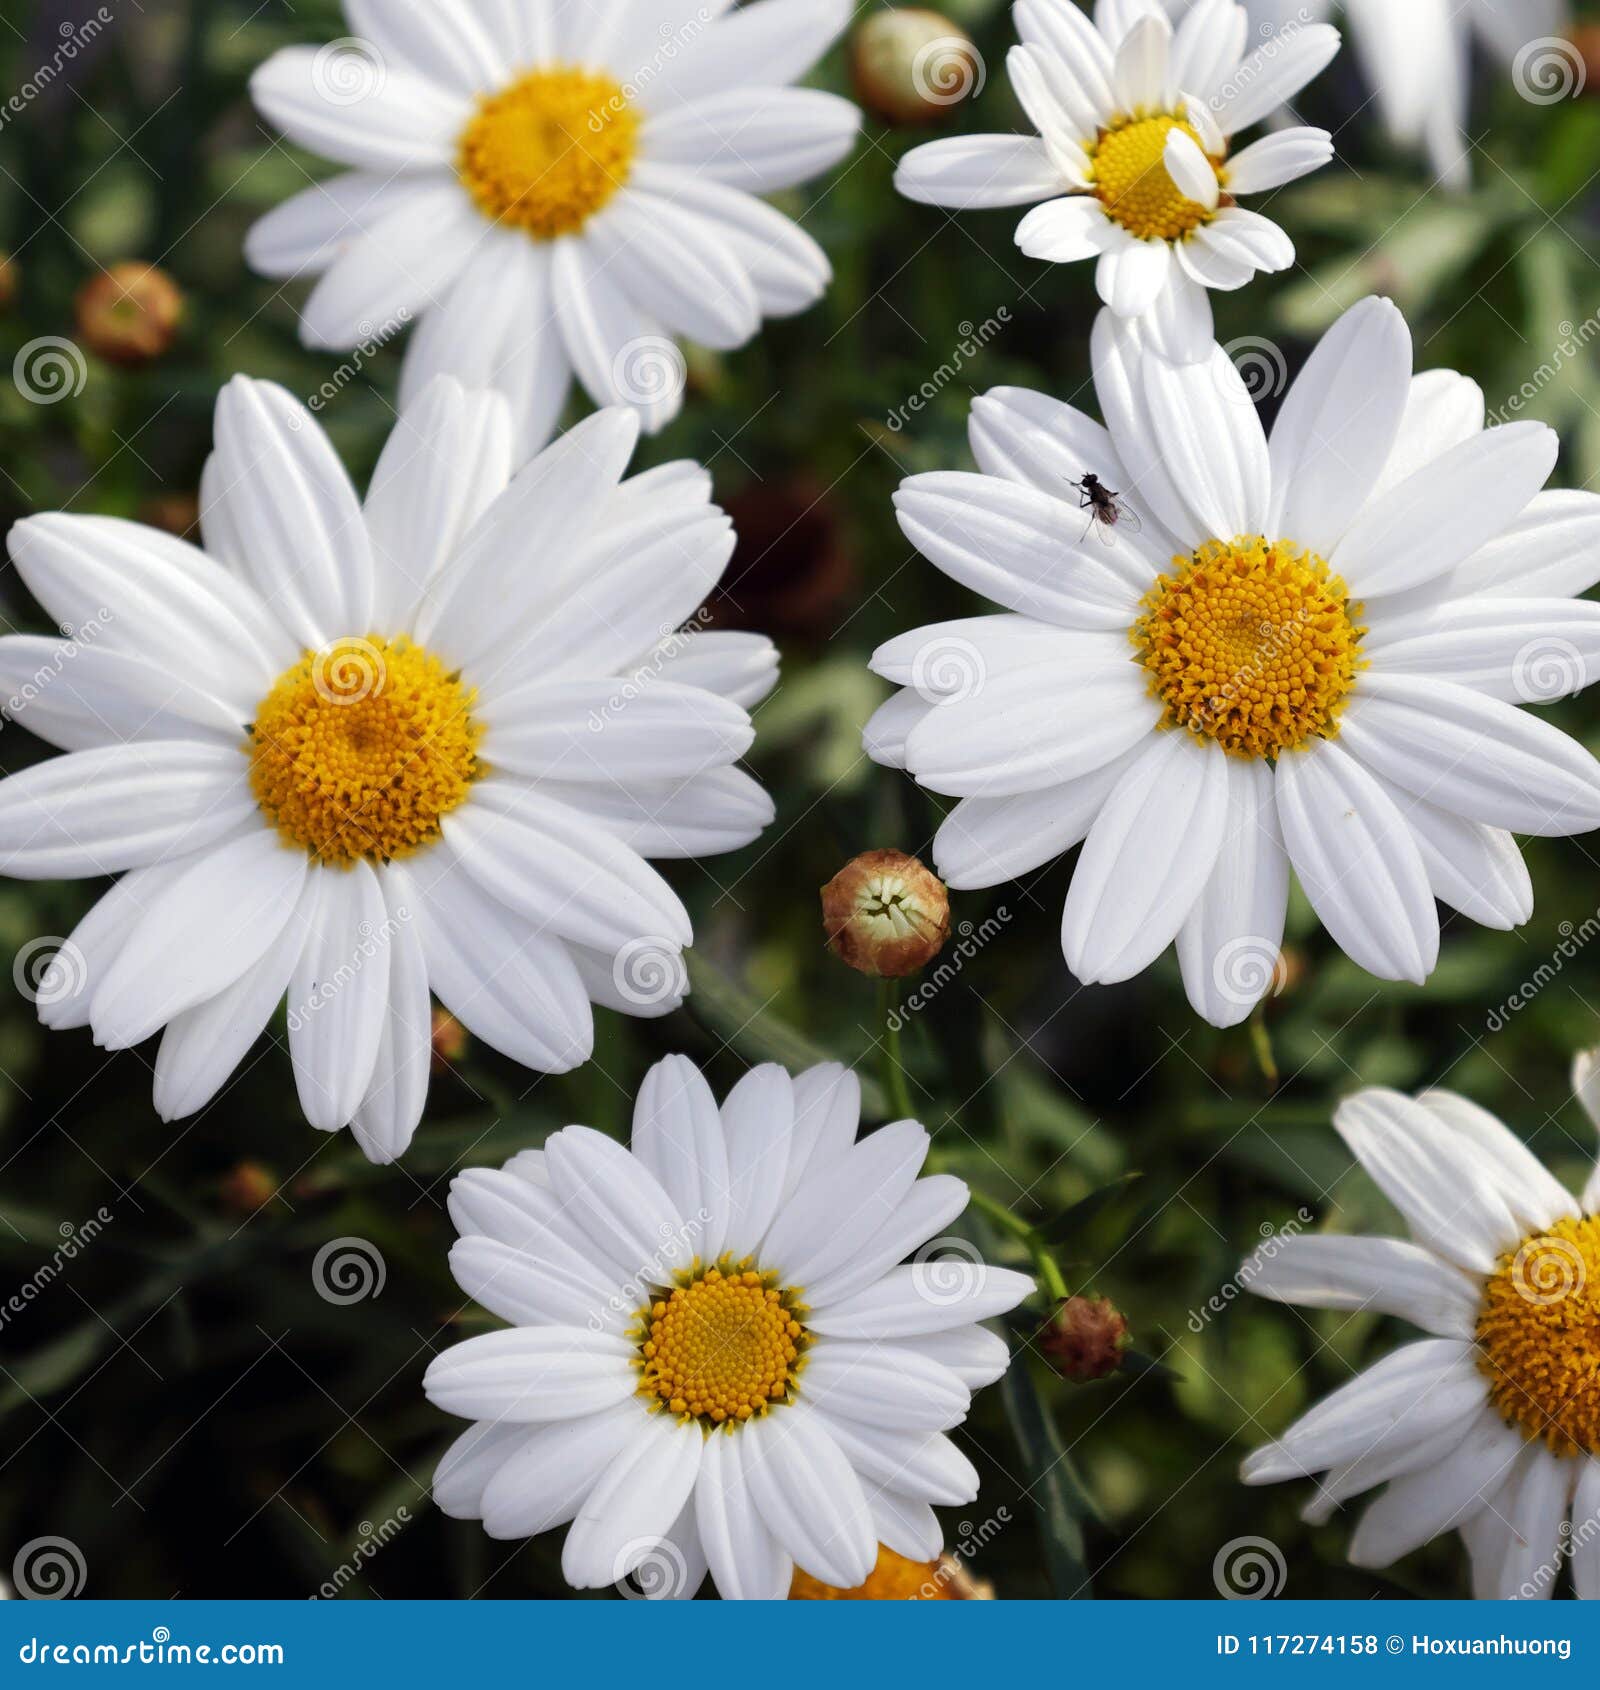 Marguerite Daisy Bloom In Pure White Stock Photo Image Of Outdoor Garden 117274158